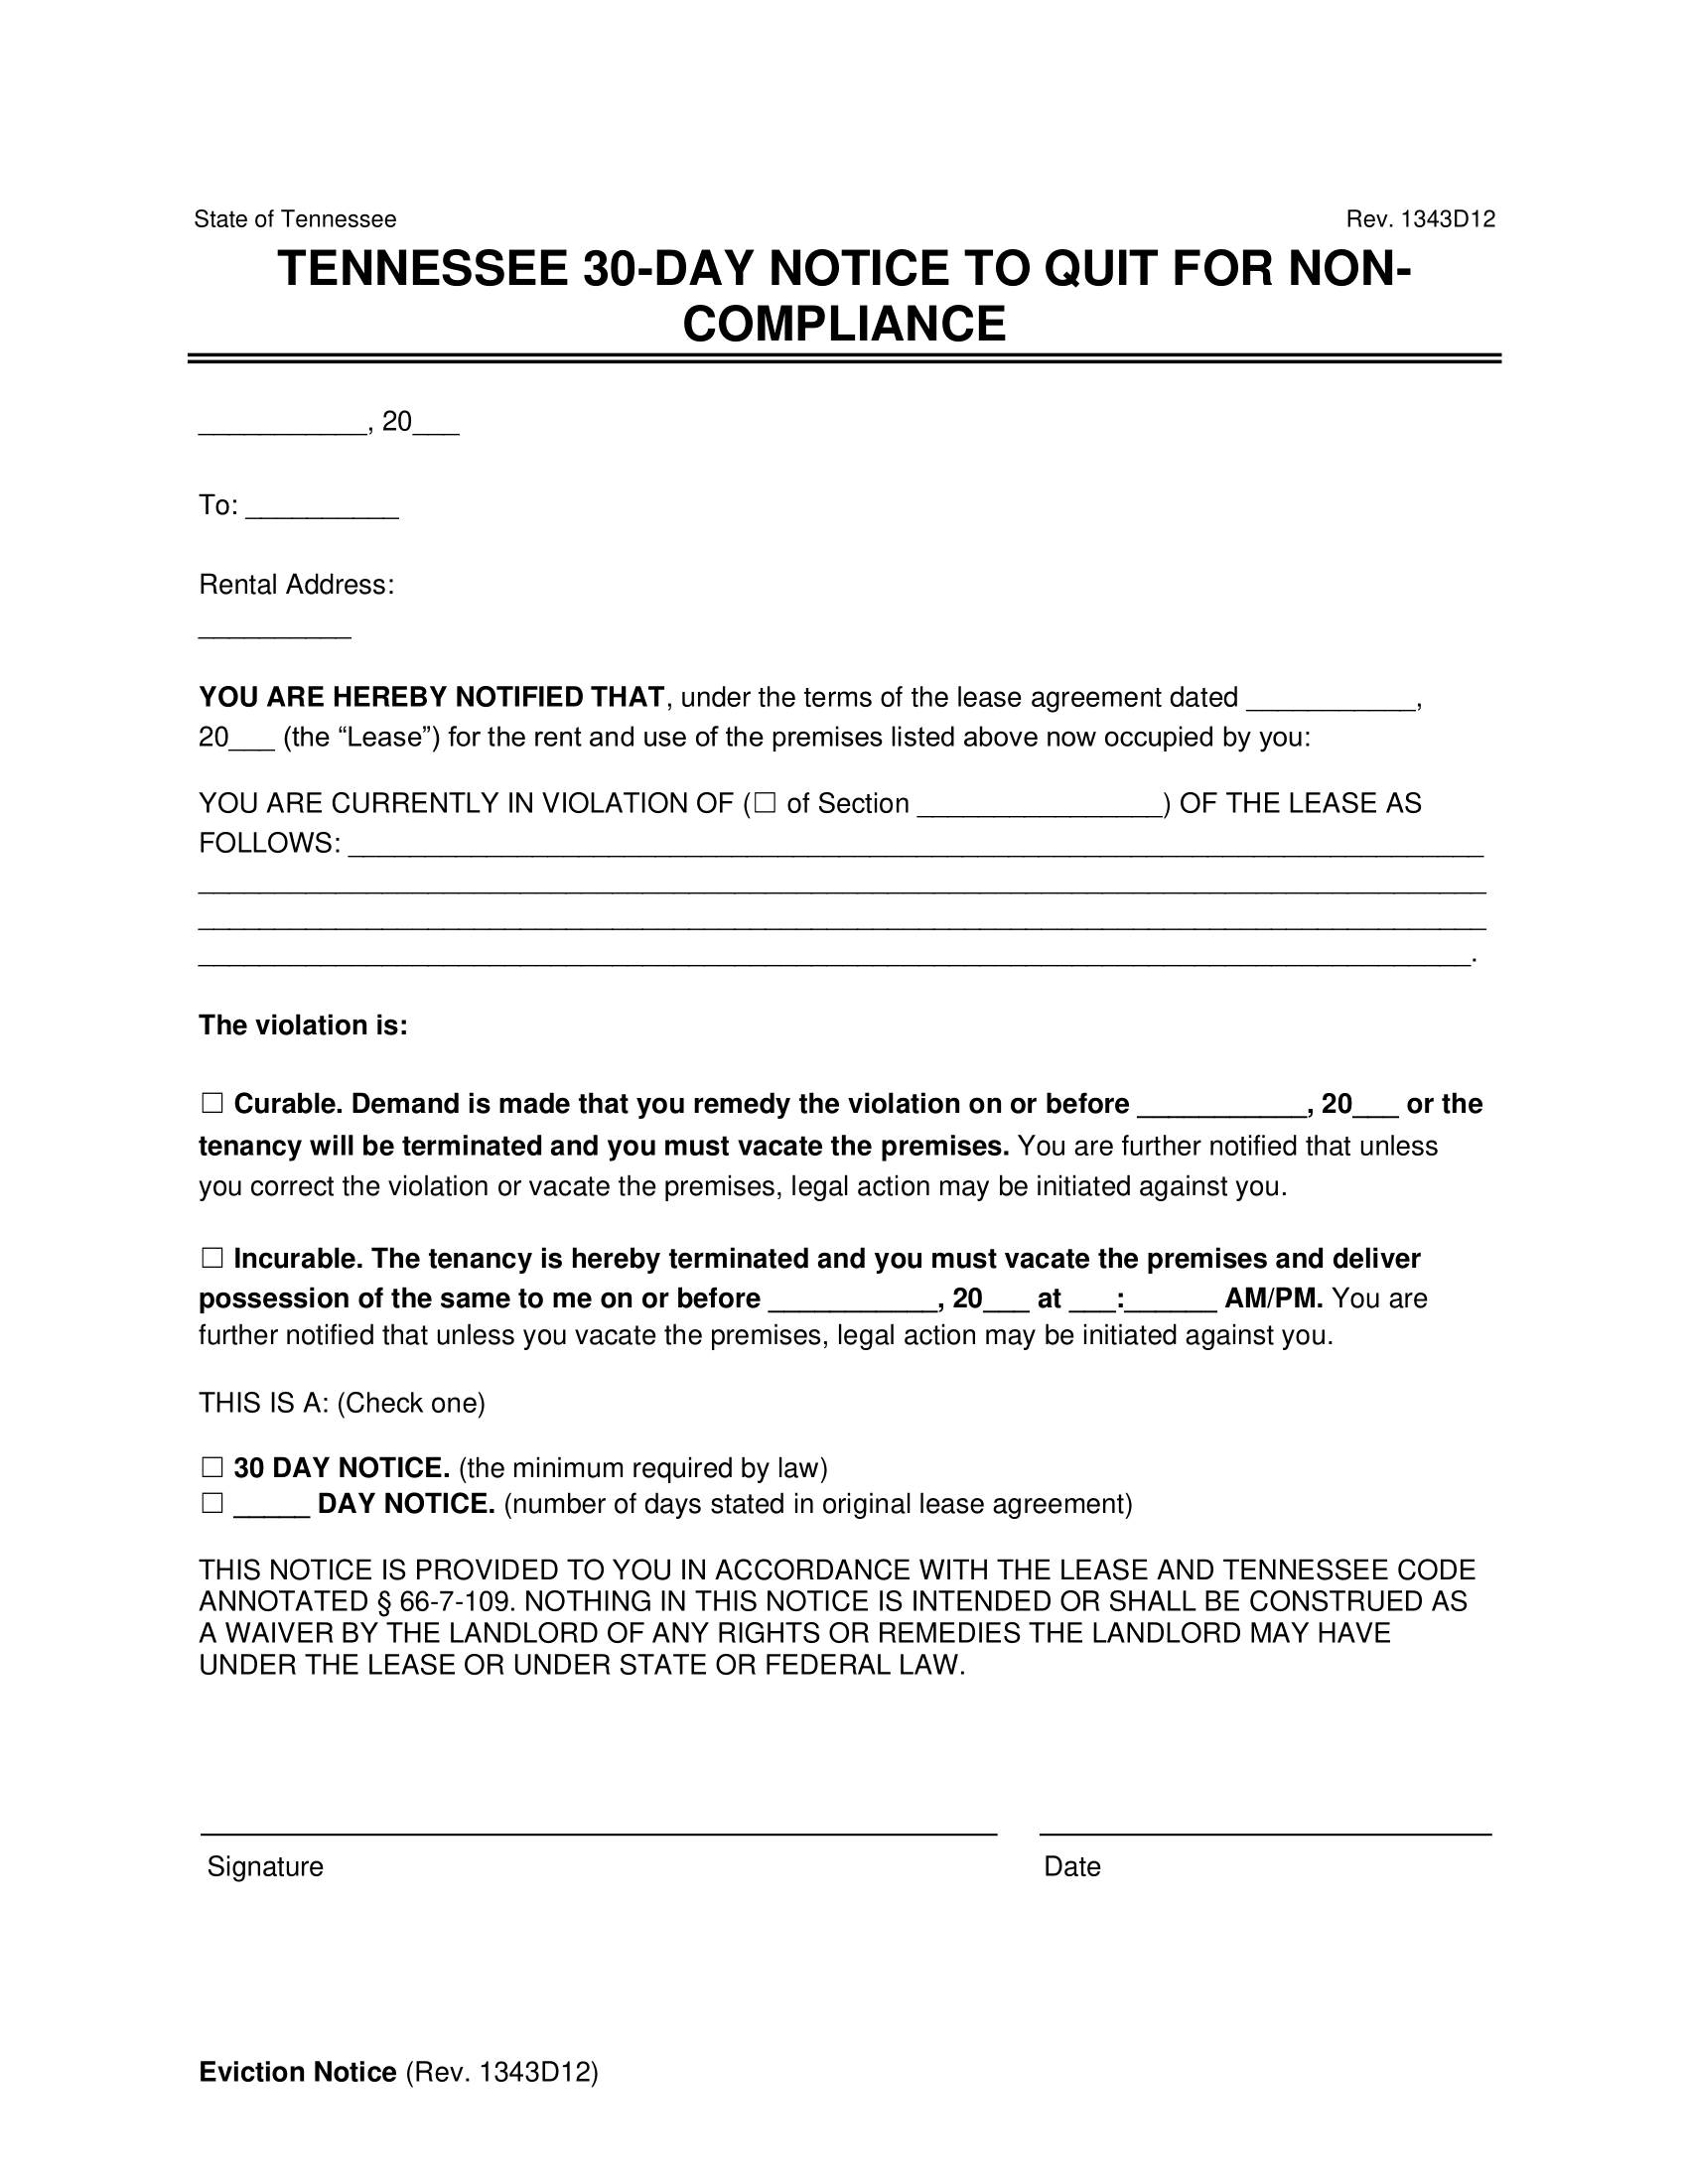 Tennessee 30-Day Notice to Quit for Non-Compliance